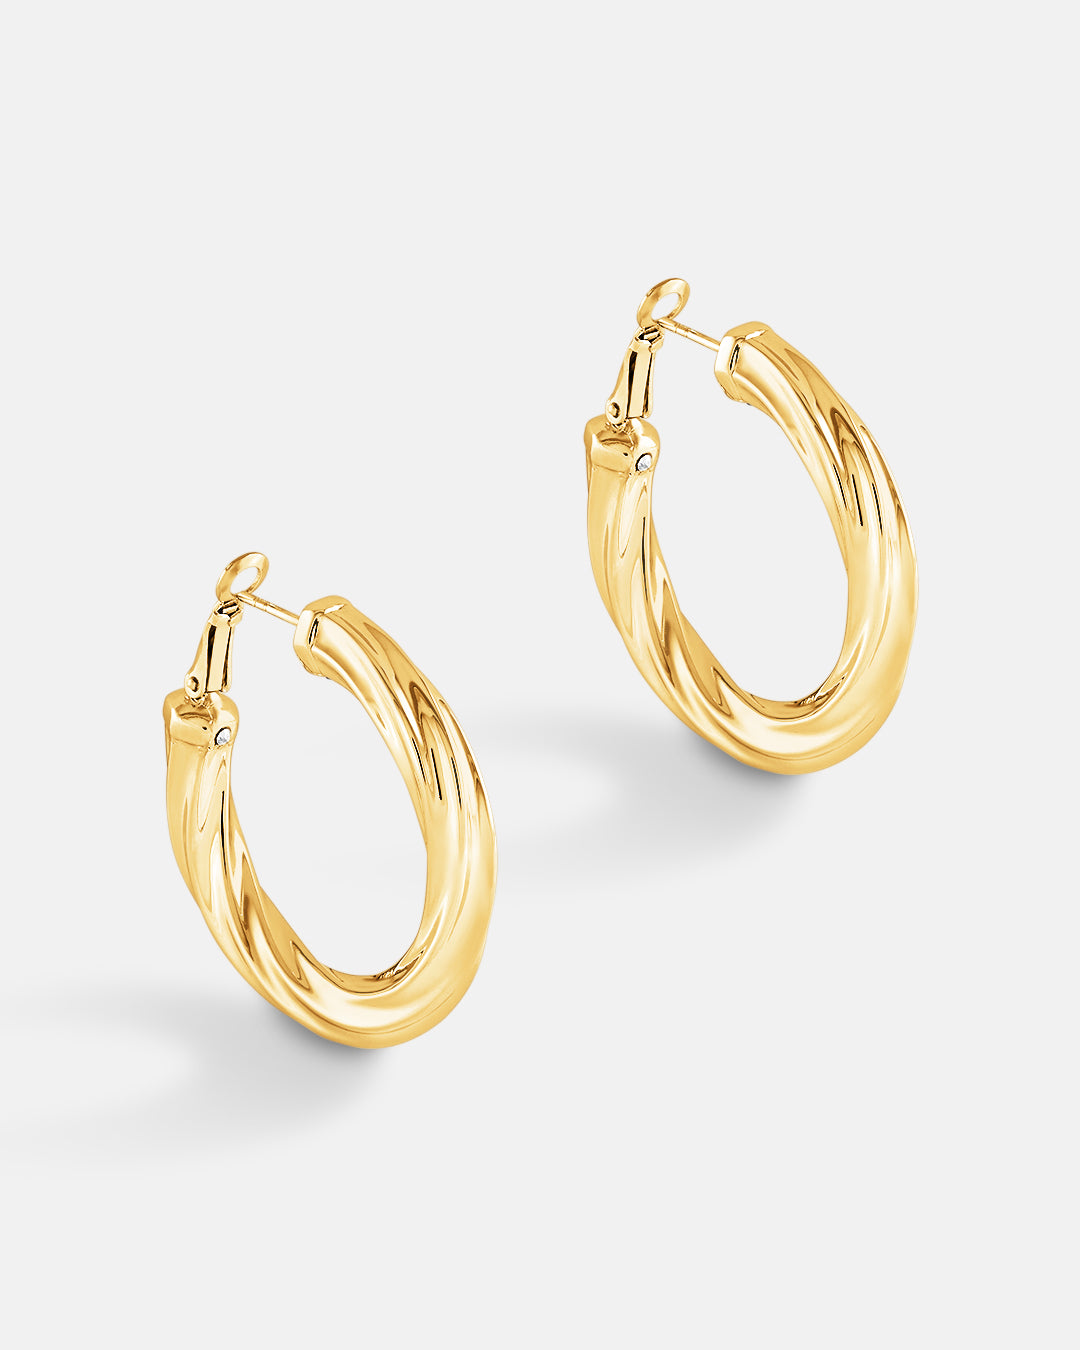 This is the product picture of luxury freeform twisted round shape hoop earrings plated in gold in sterling silver material